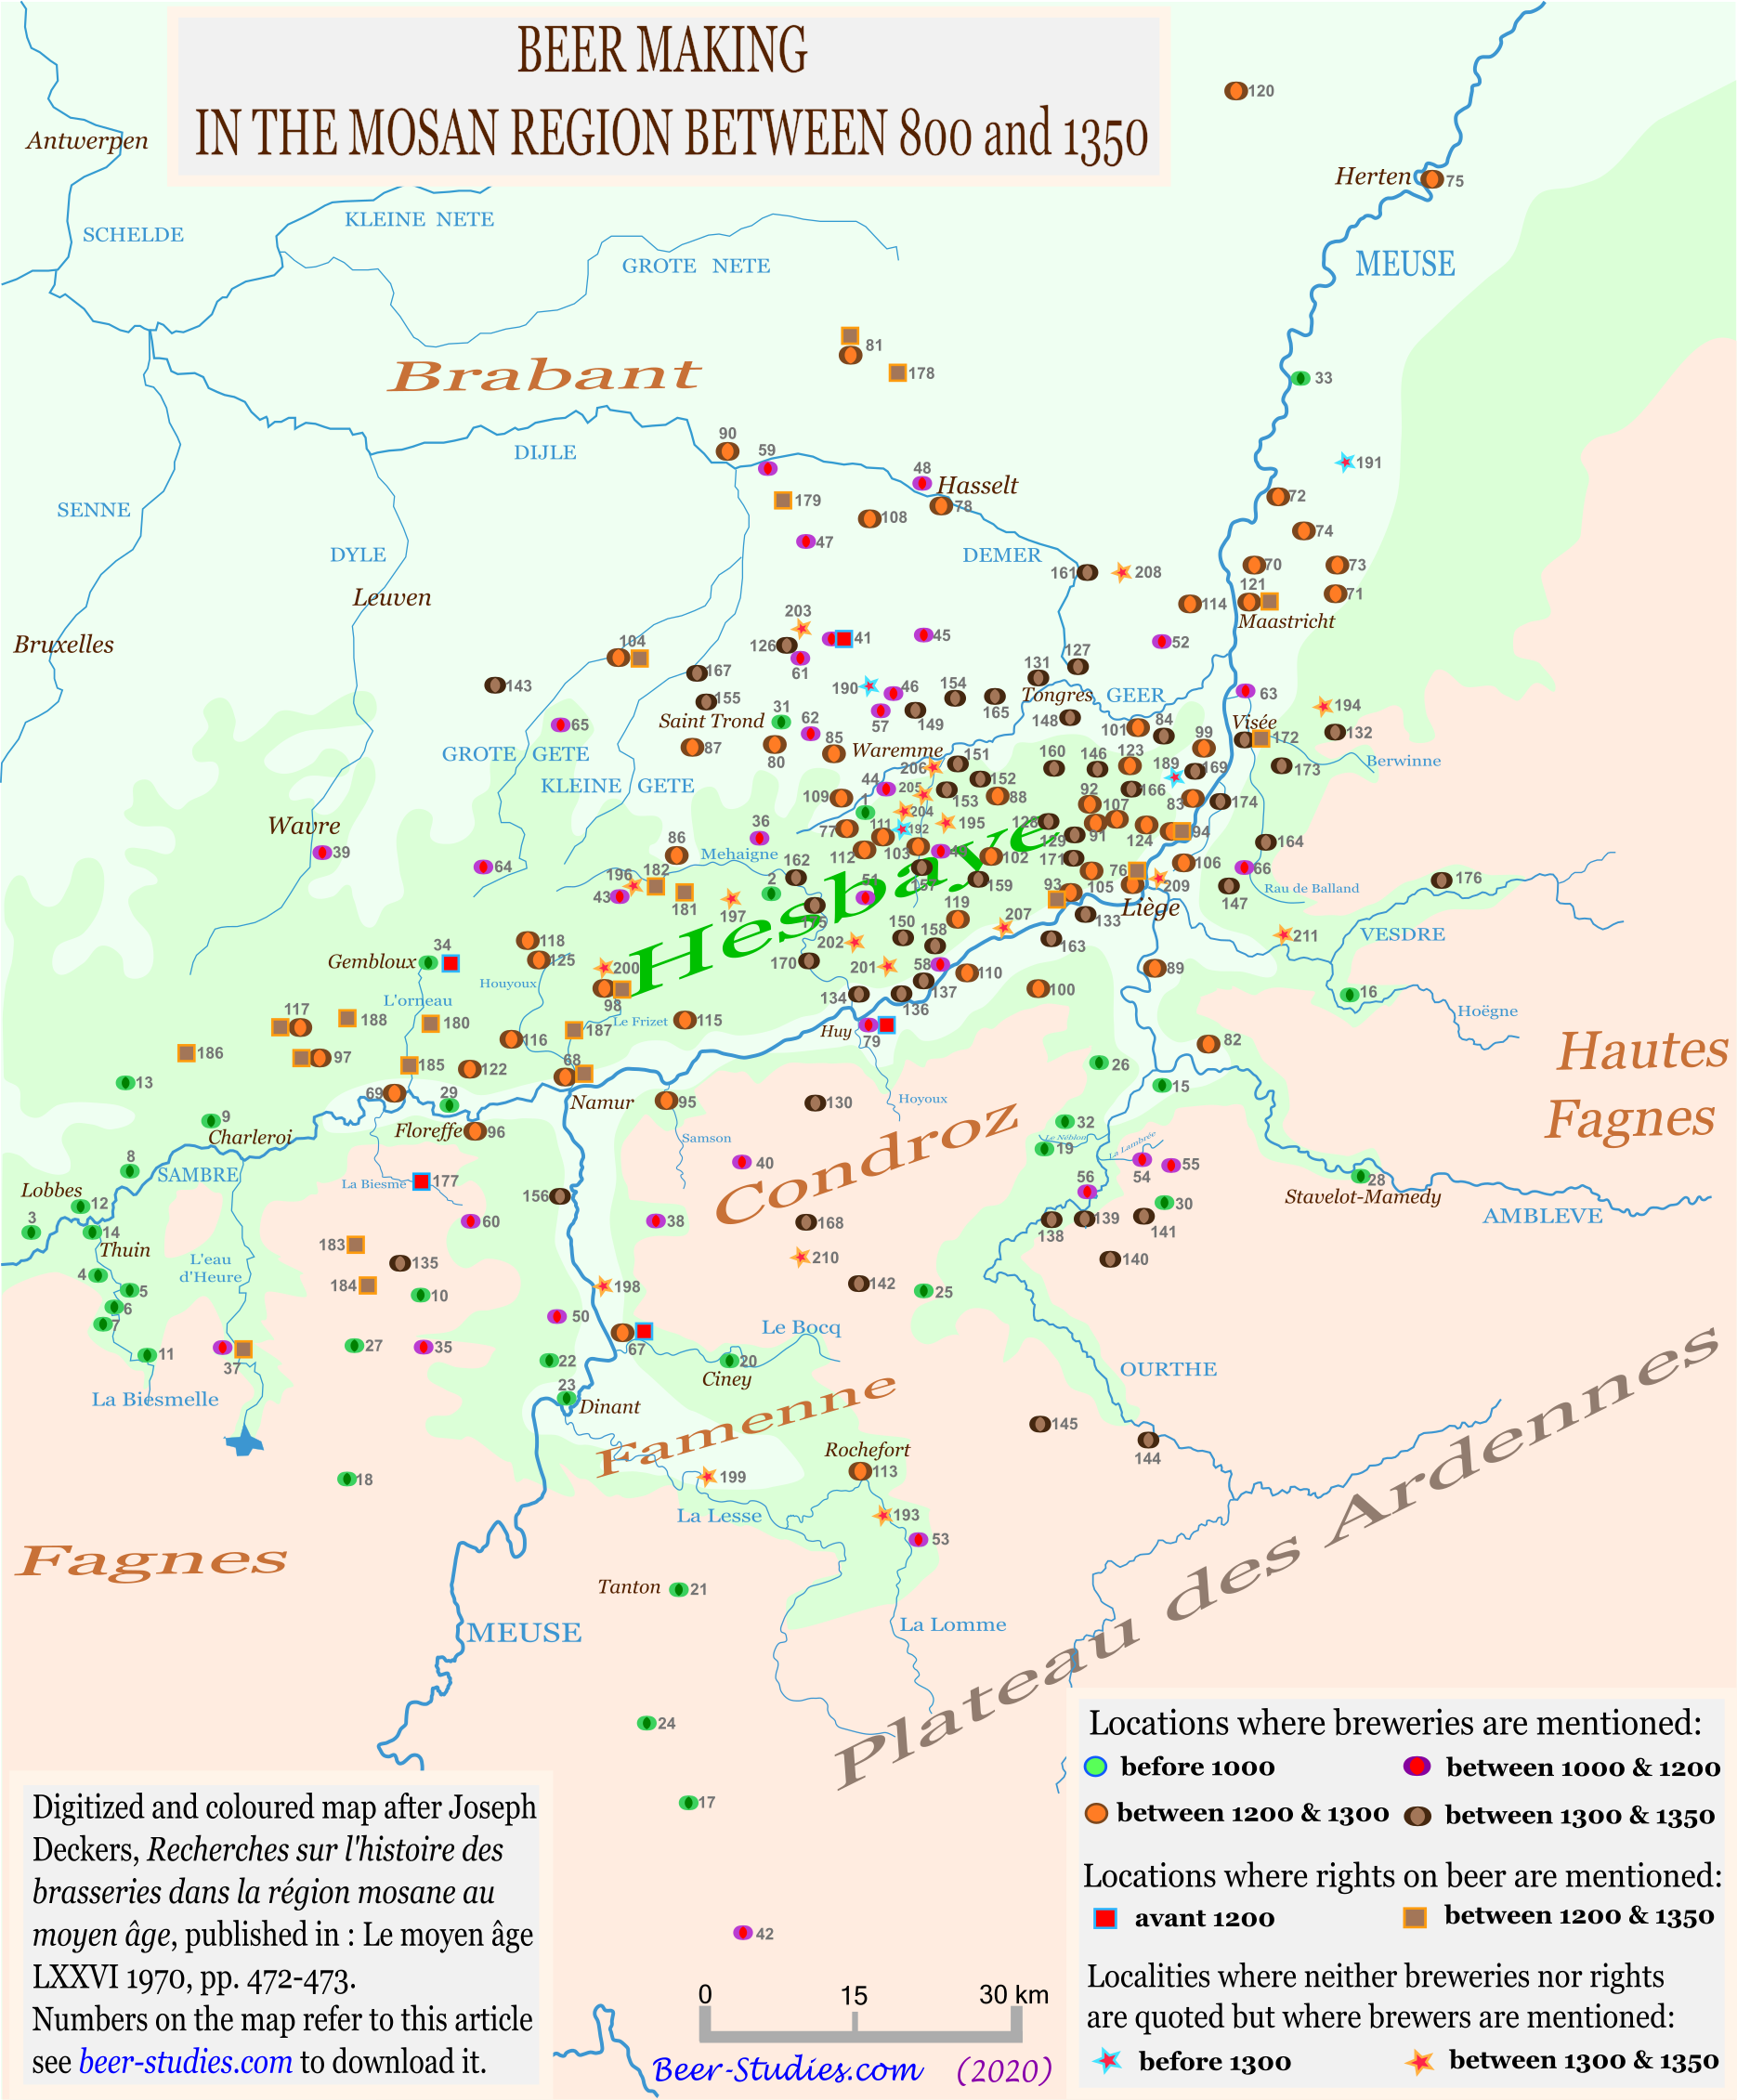 Deckers. Map of the breweries in the middle river Meuse basin between 800 and 1350